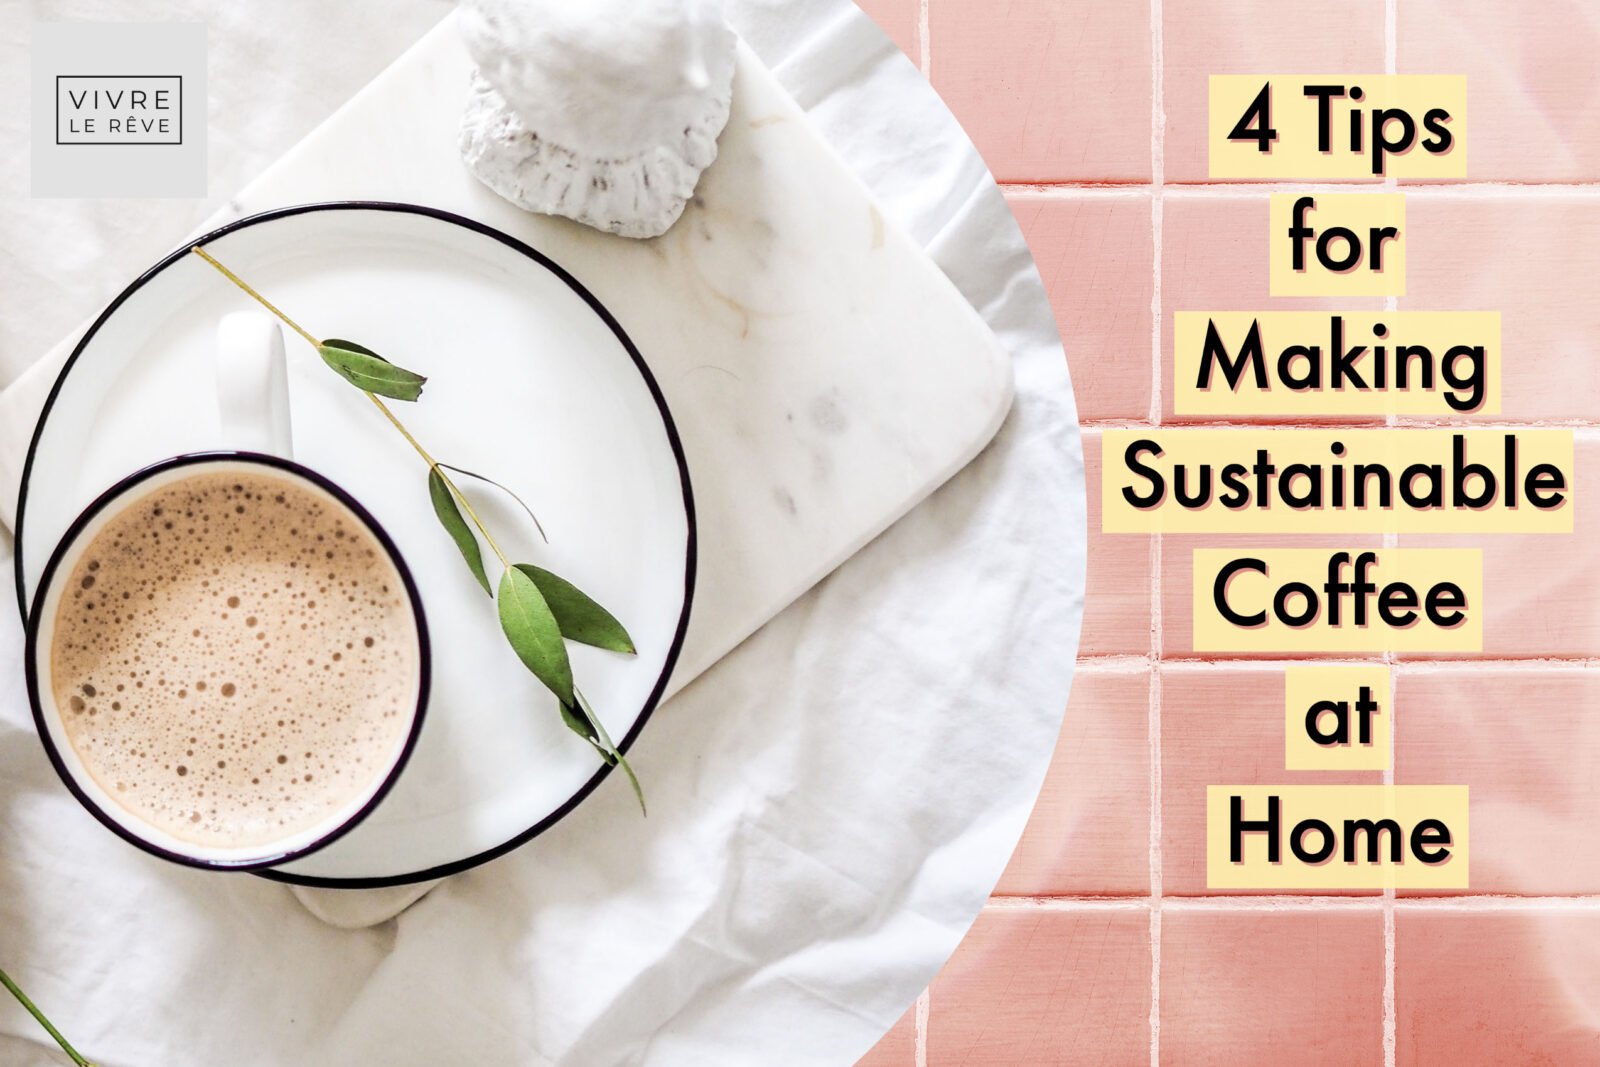 4 Tips for Making Sustainable Coffee at Home